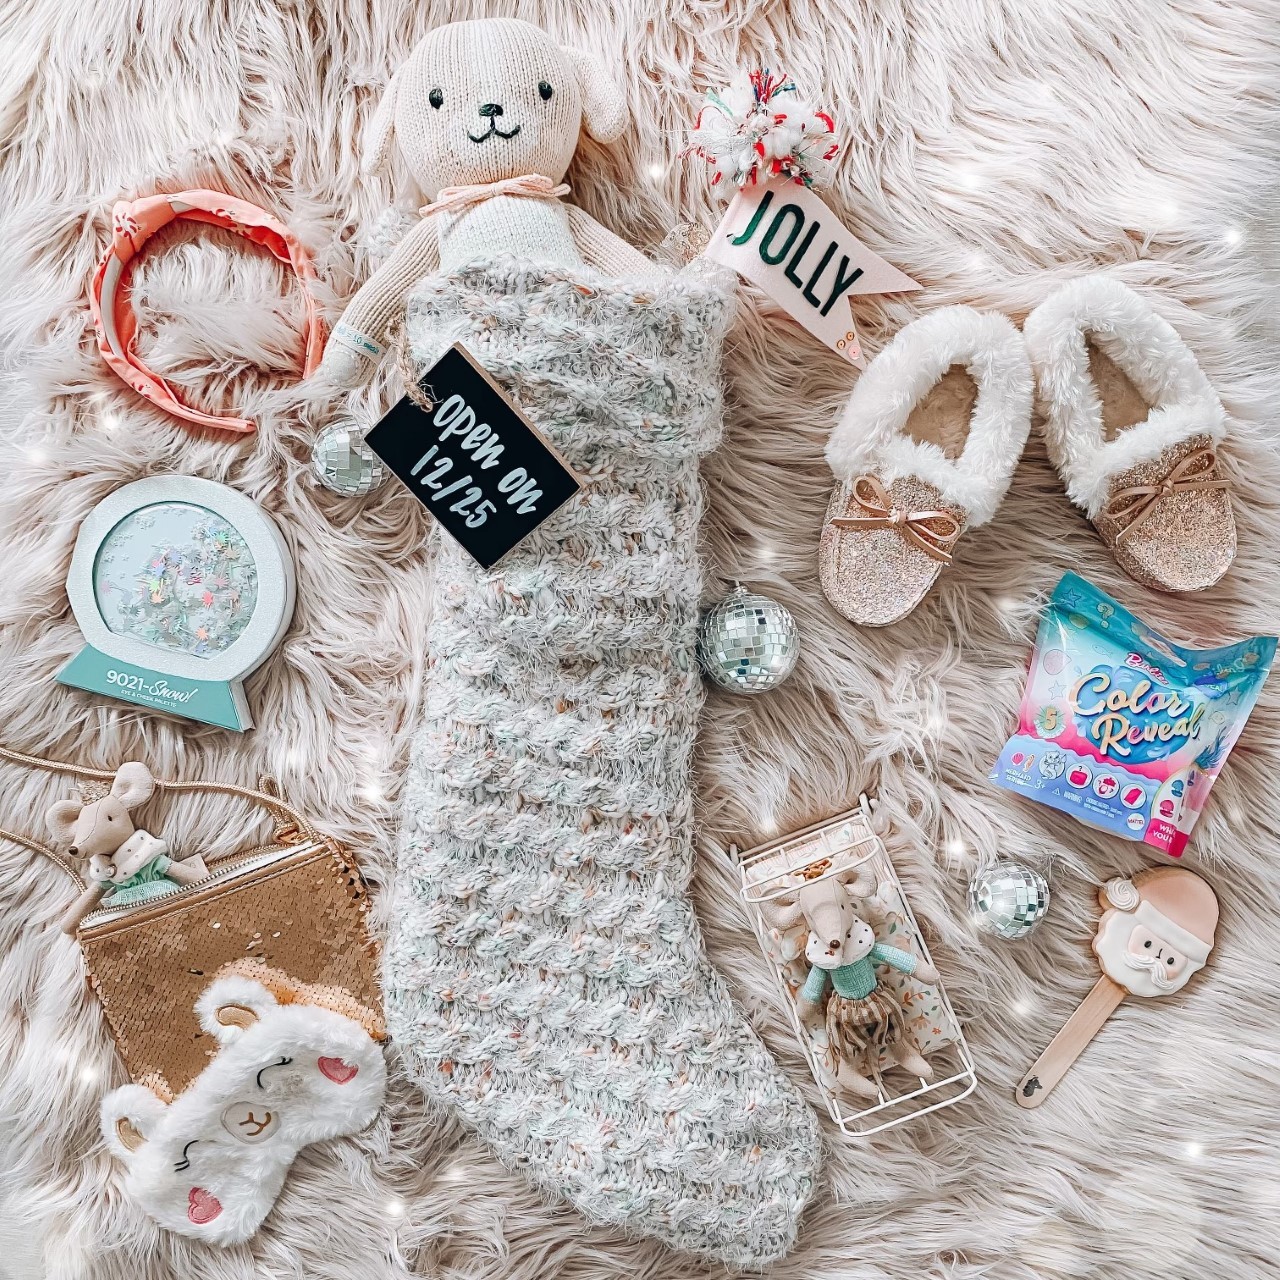 Gifts for Her Gift Guide - Stephanie Hanna Blog